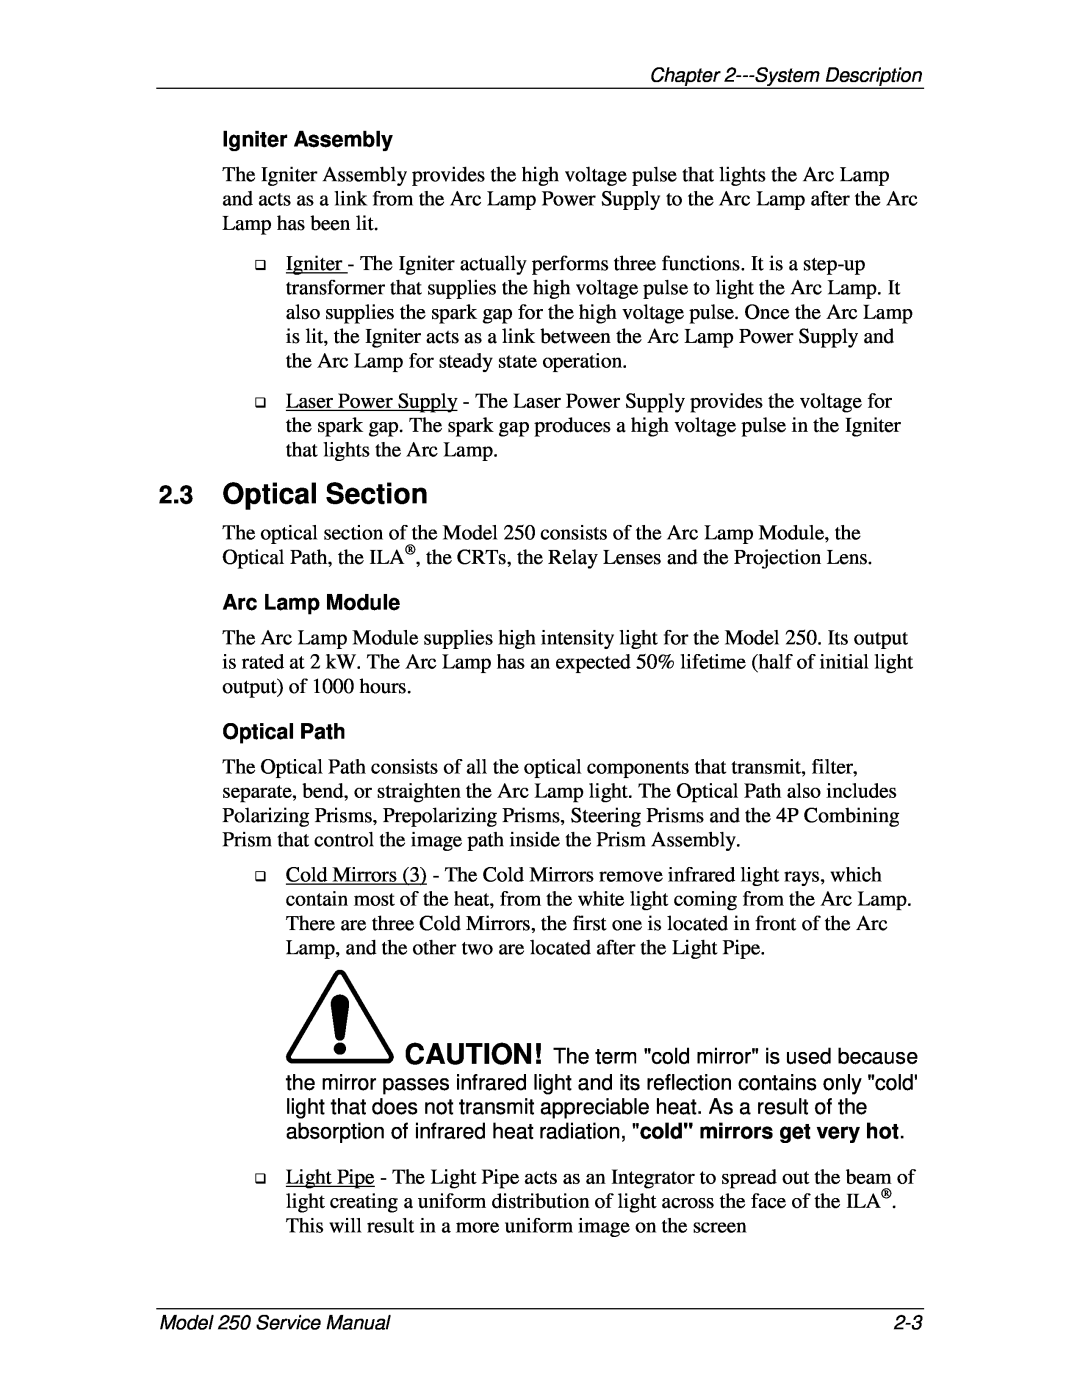 JVC 250 service manual Optical Section, Igniter Assembly, Arc Lamp Module, Optical Path 